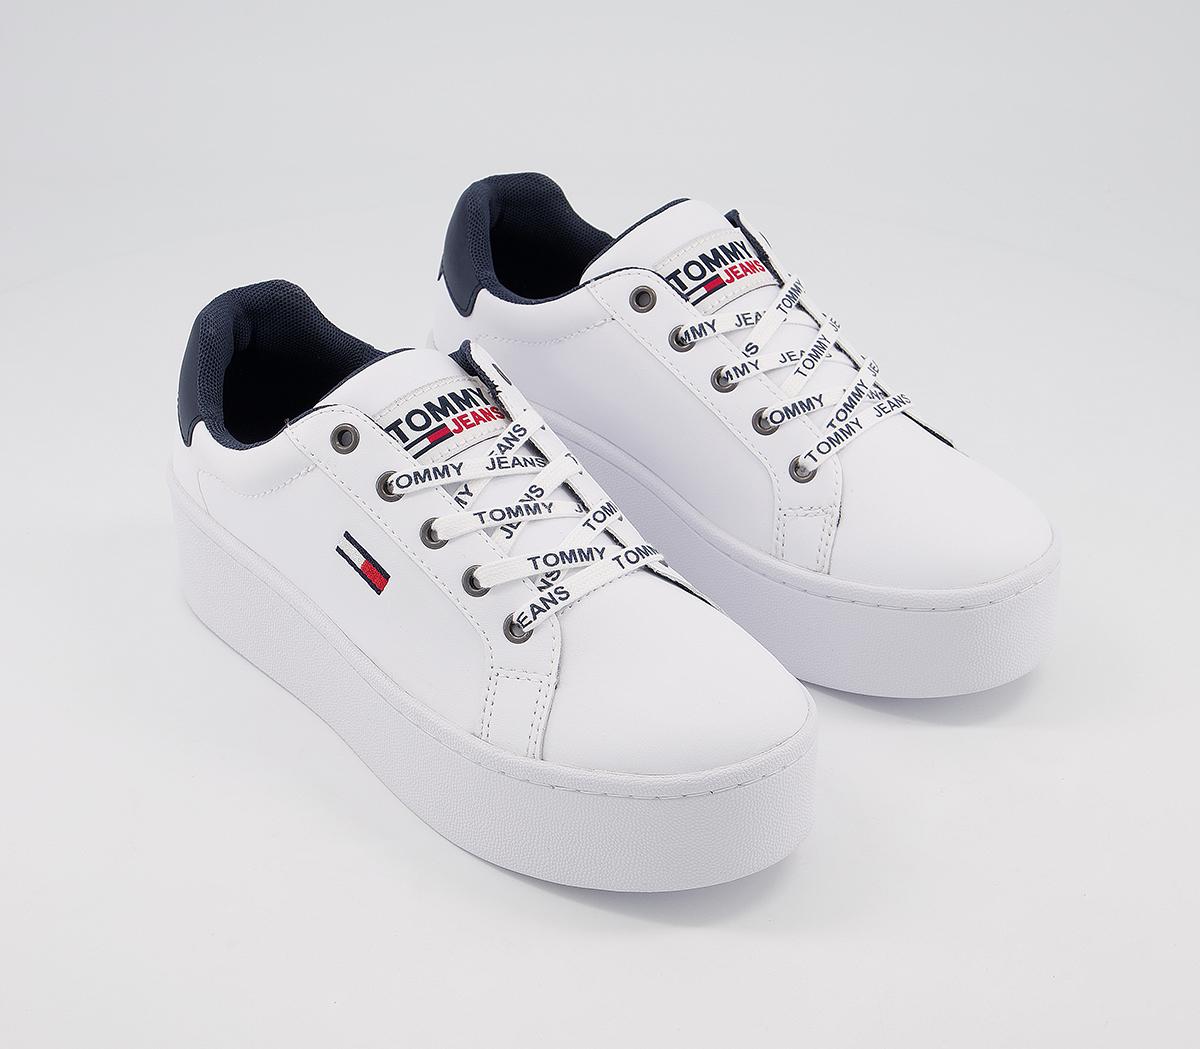 Tommy Hilfiger Iconic Leather Flatform Sneakers White - Hers trainers